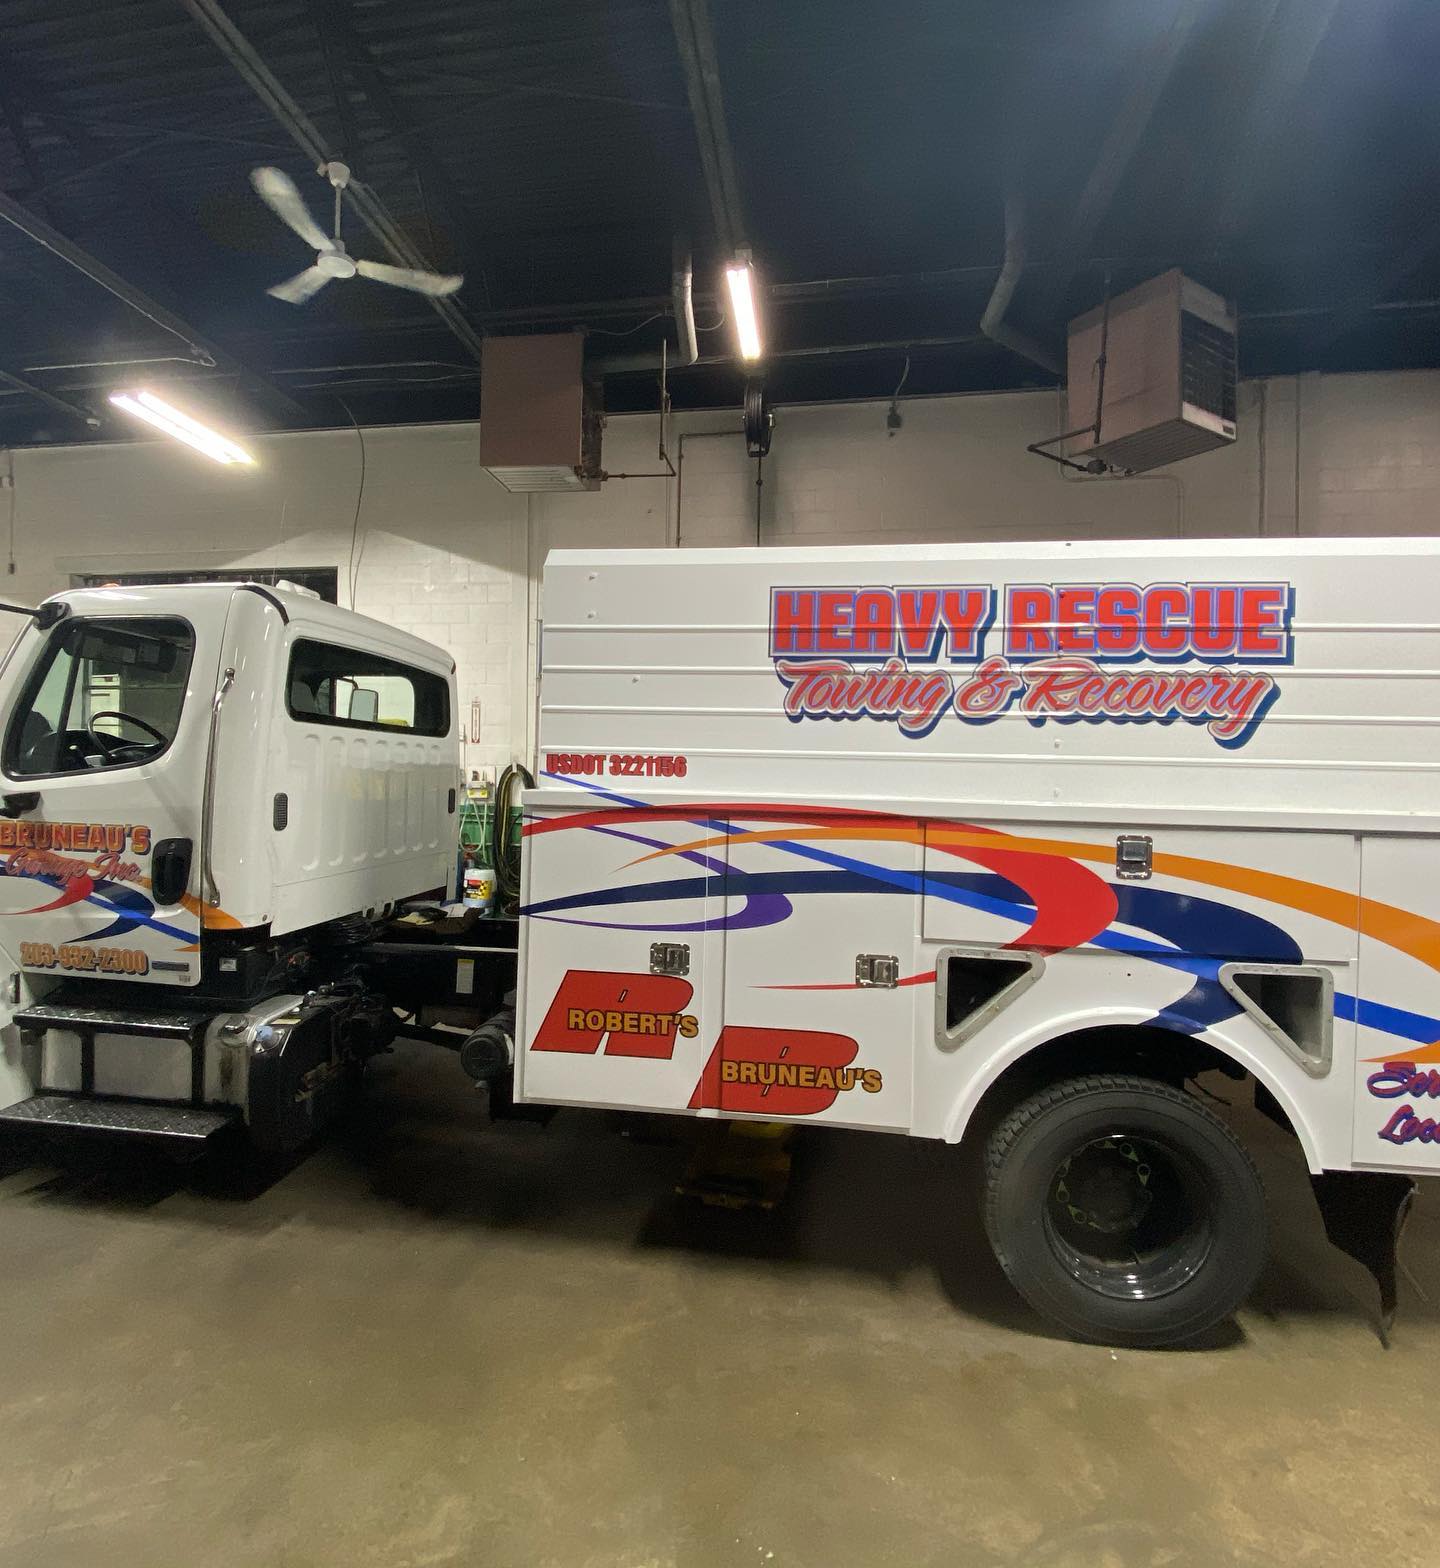 Heavy Rescue Towing & Recovery